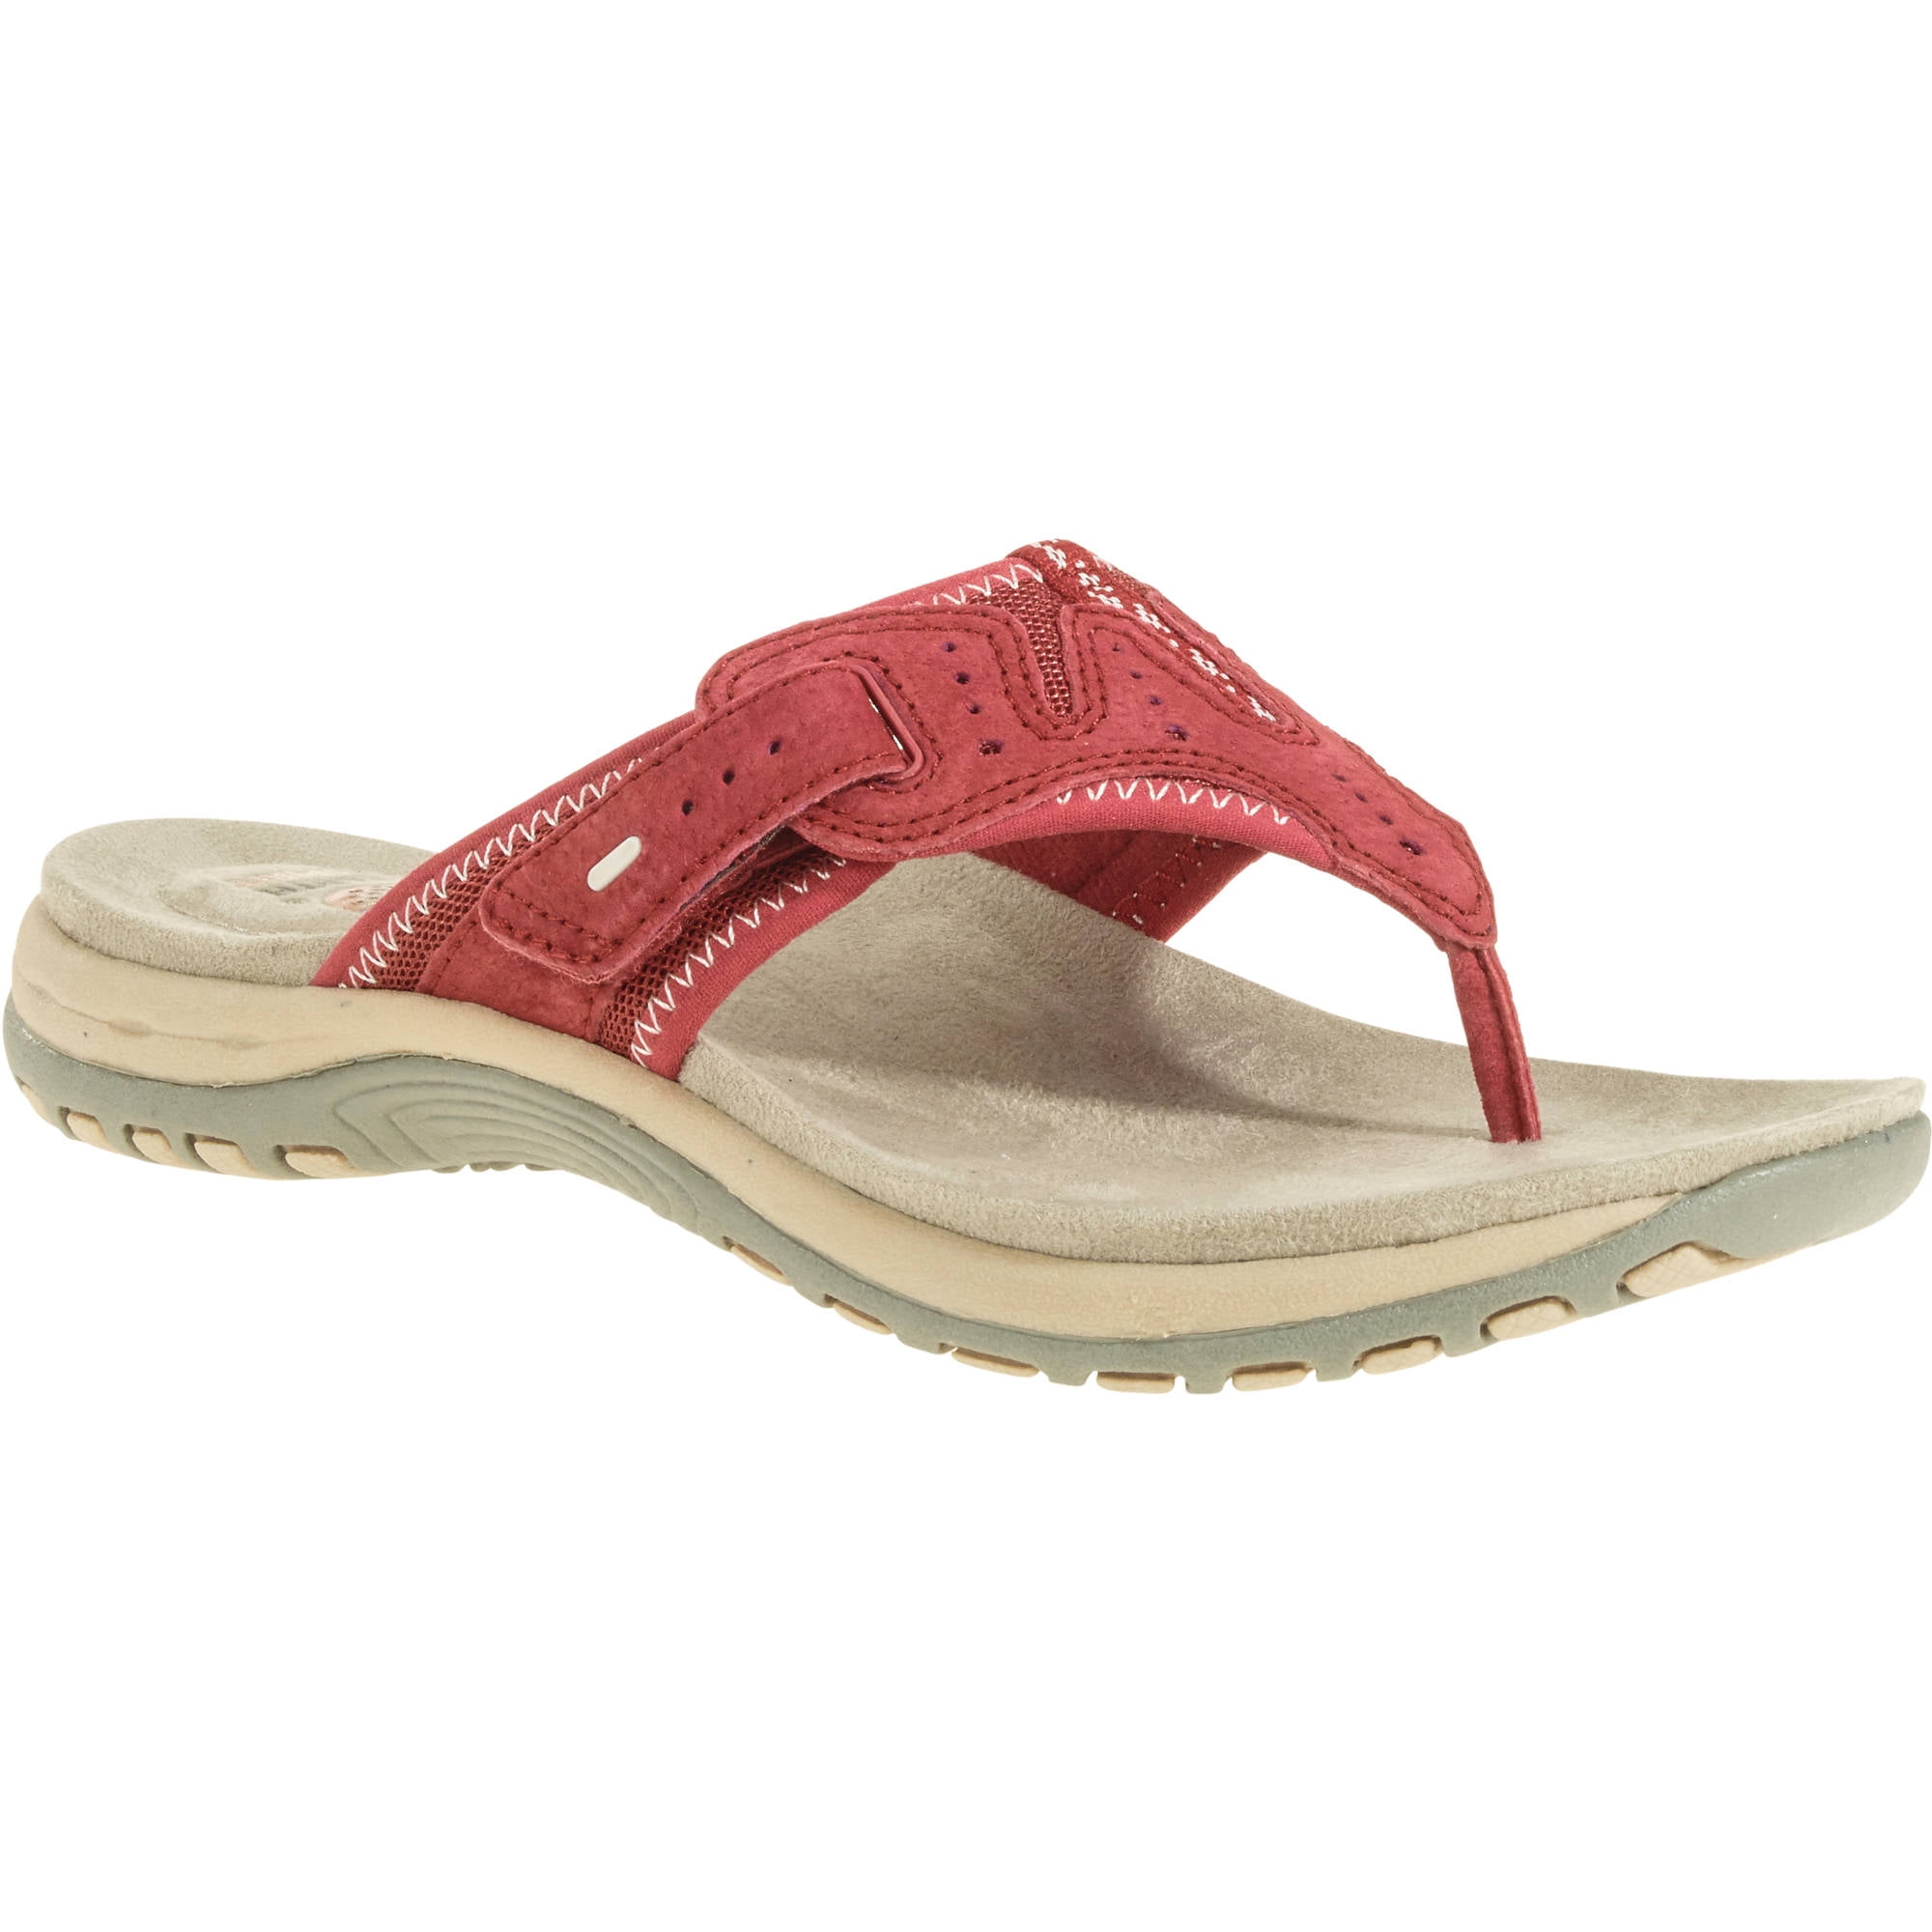 earth shoes sandals clearance